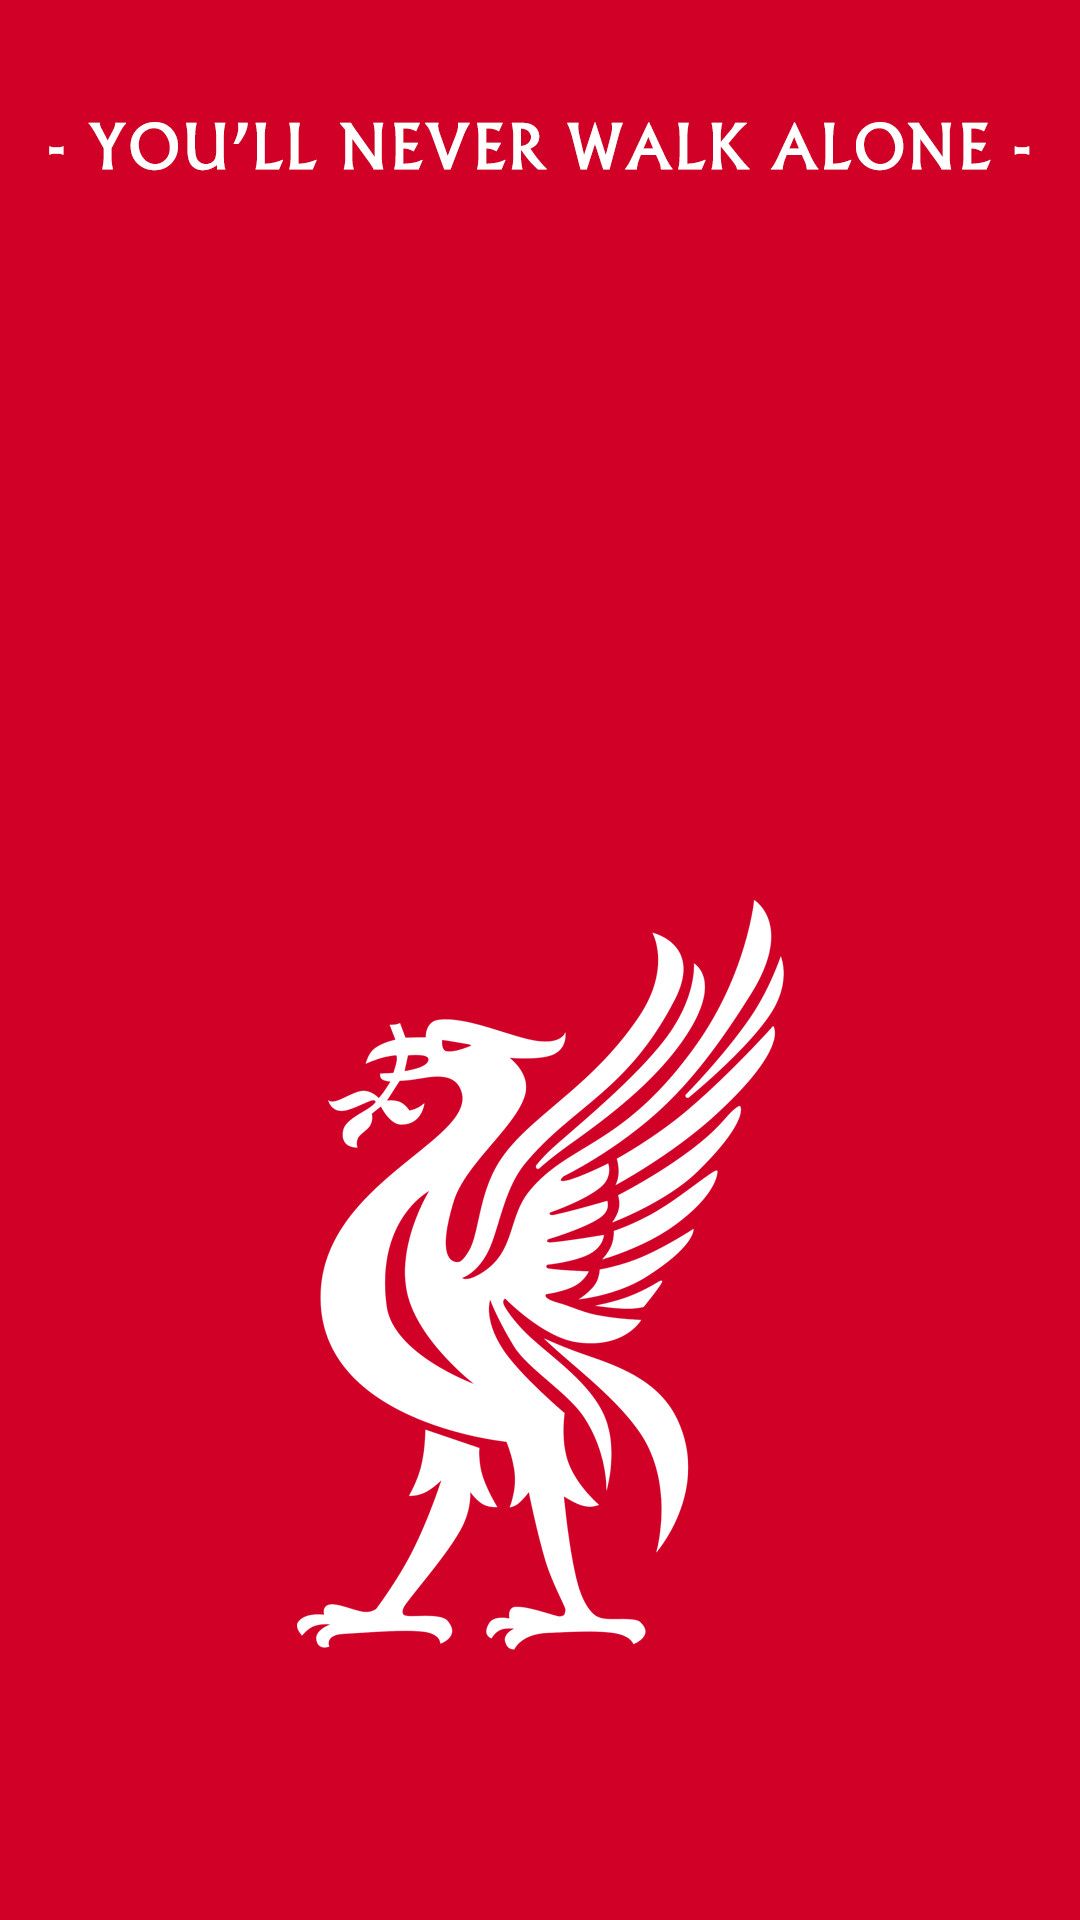 Thought we could share ideas on themes so, if it is Liverpool